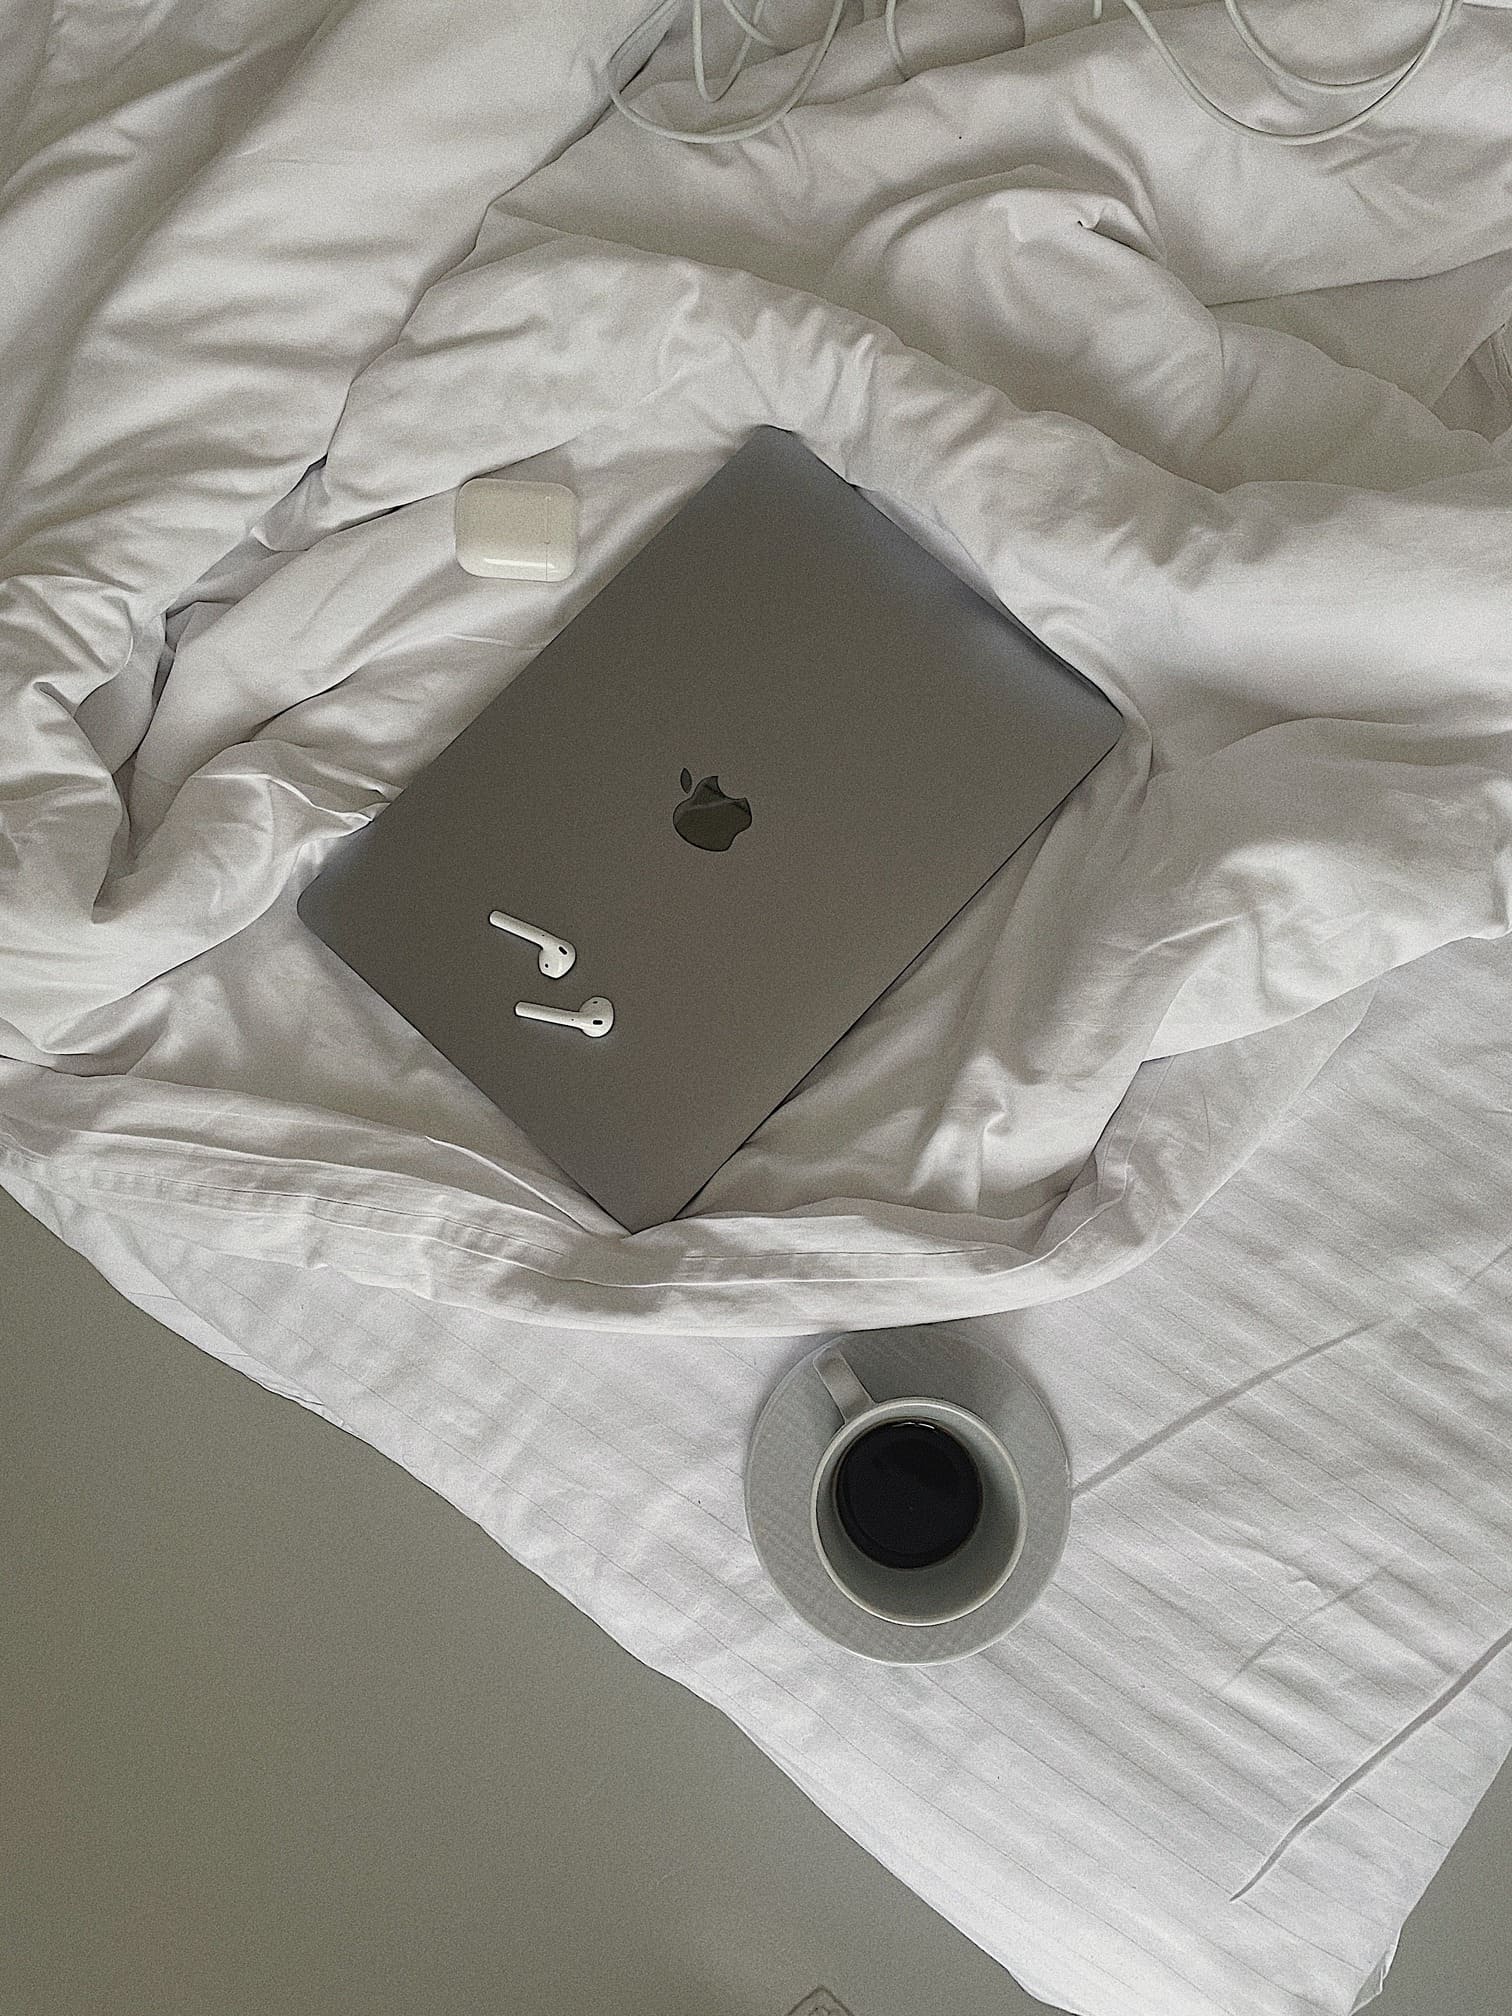 laptop and airpod on bed with white sheets